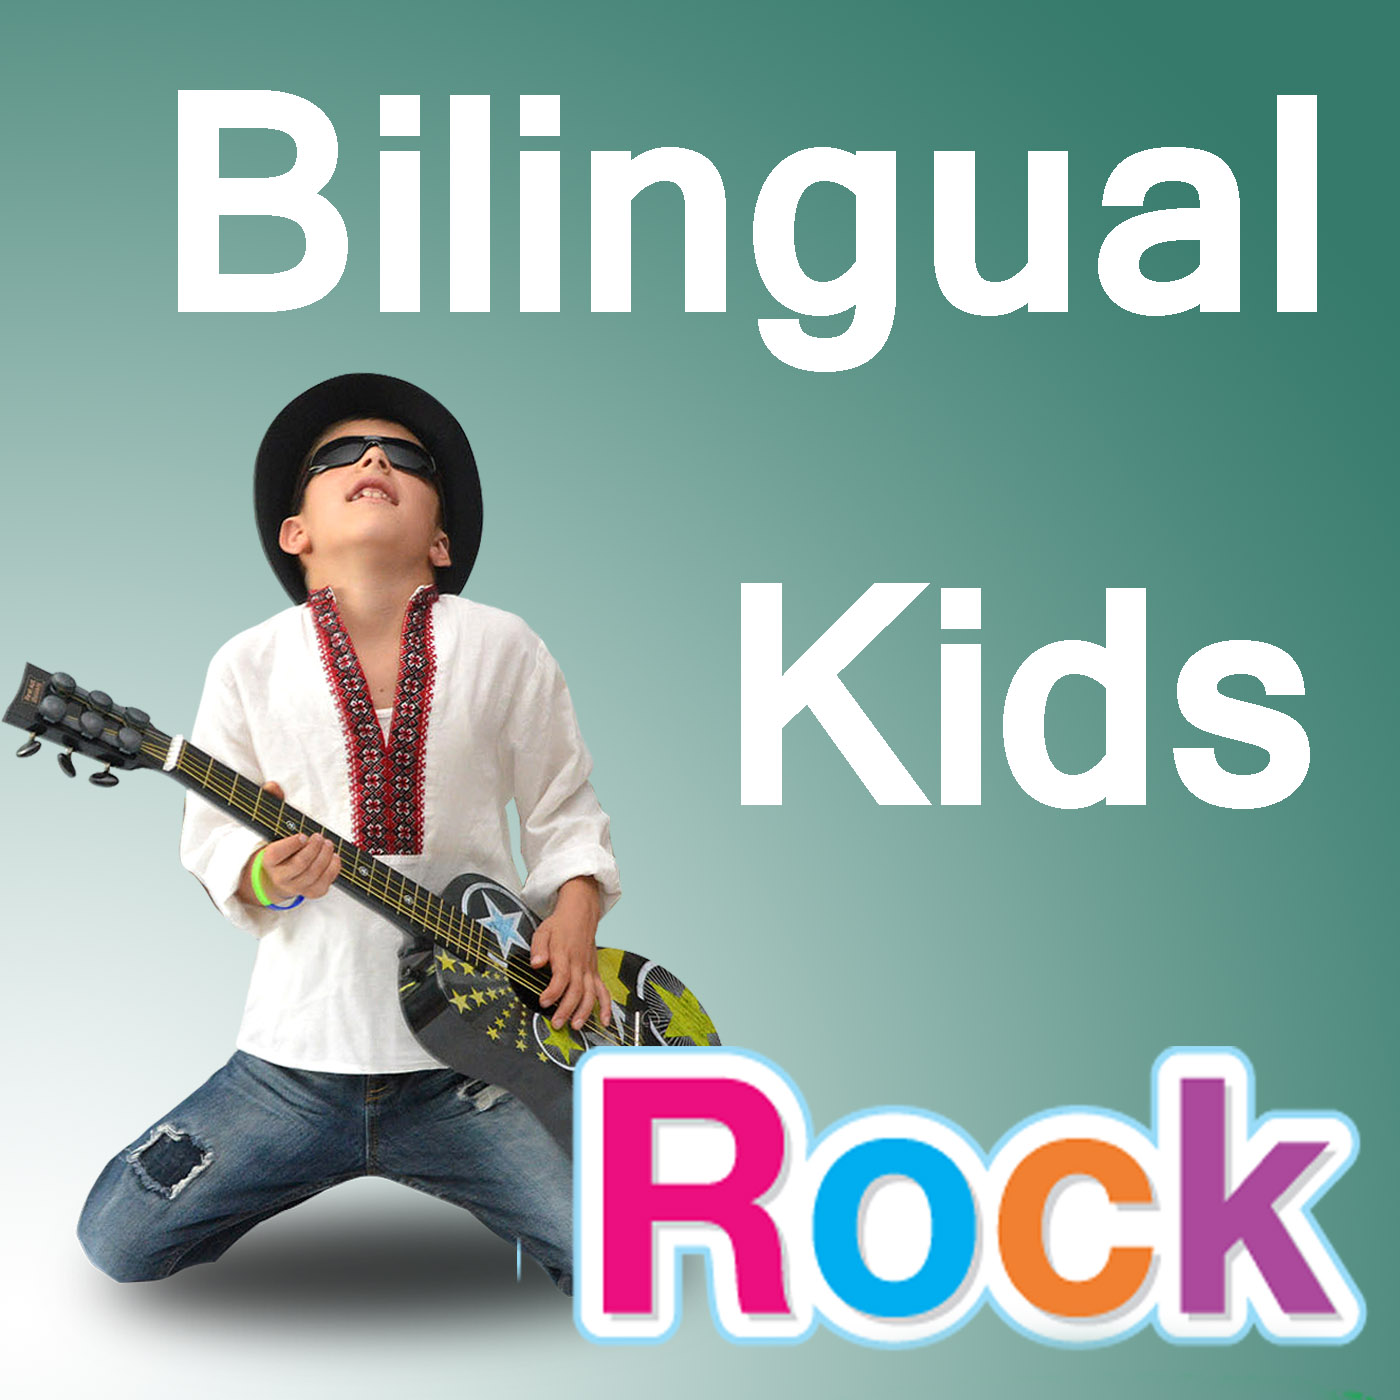 Bilingual Kids Rock Podcast: Raising Multilingual Children, Multicultural Living, Growing Up With Multiple Languages.